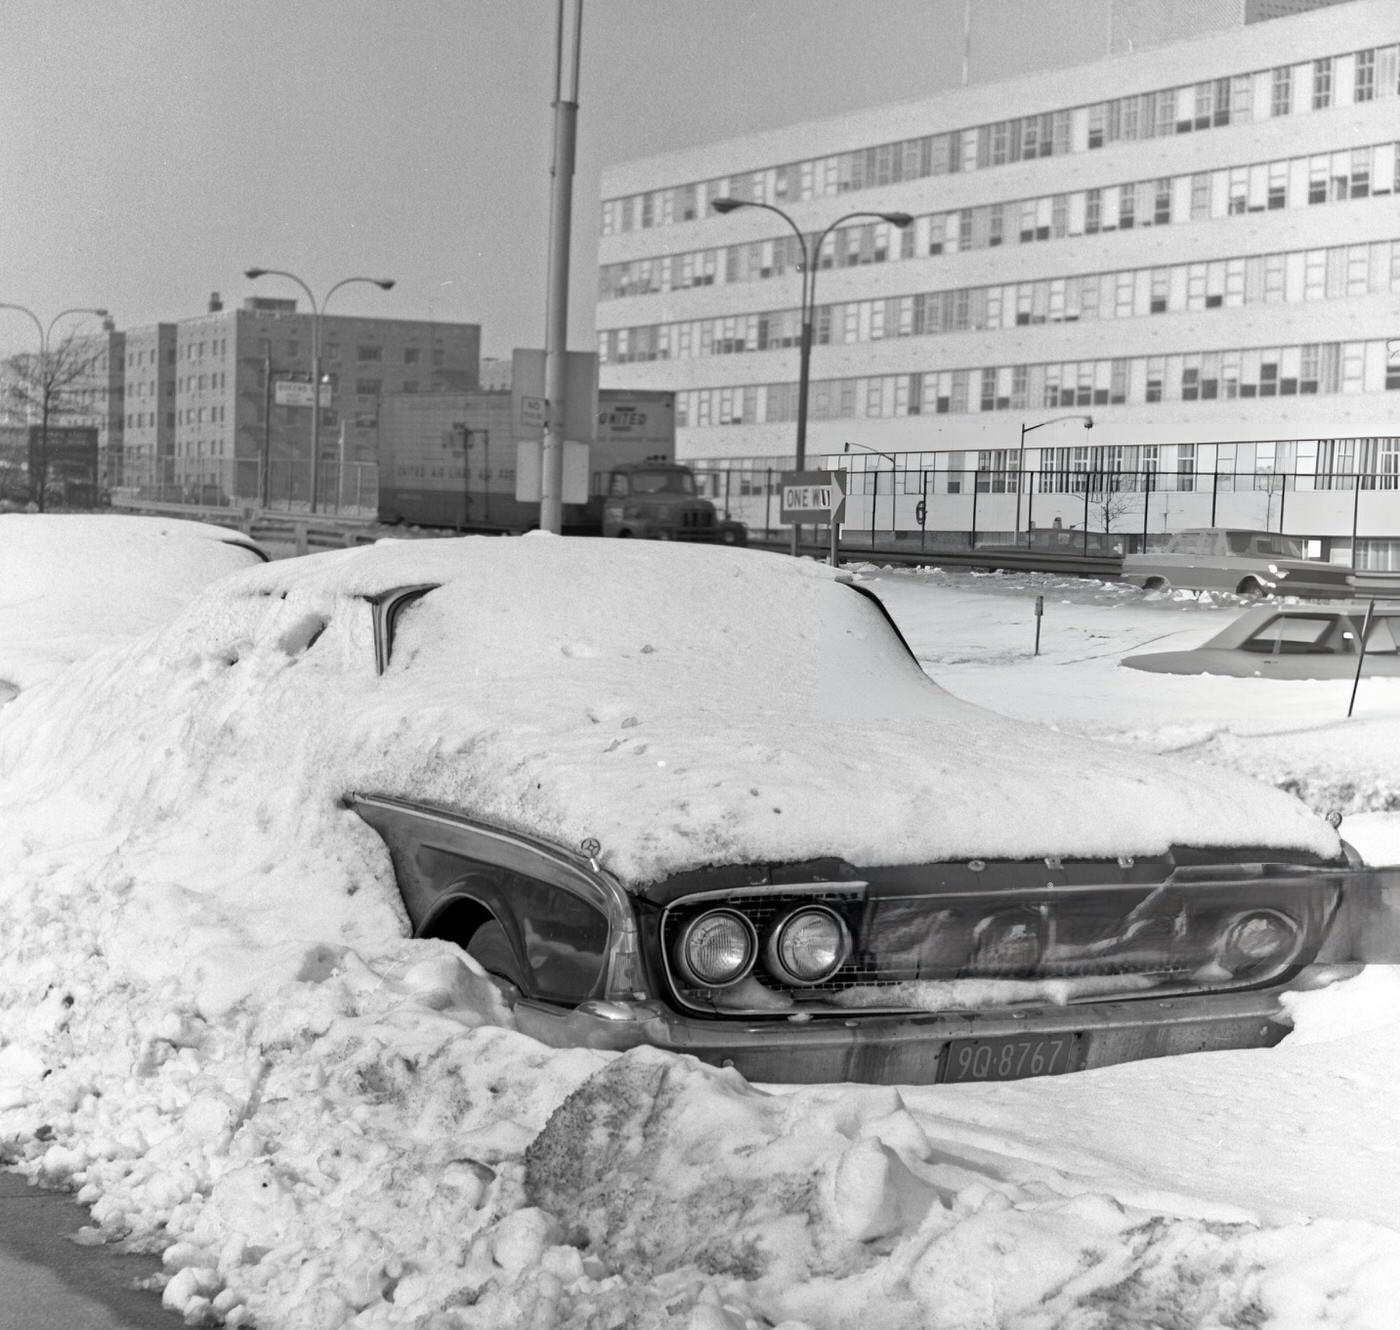 A Ford Sedan Buried In Snow Along The Horace Harding Expressway In Rego Park, Queens, 1967.